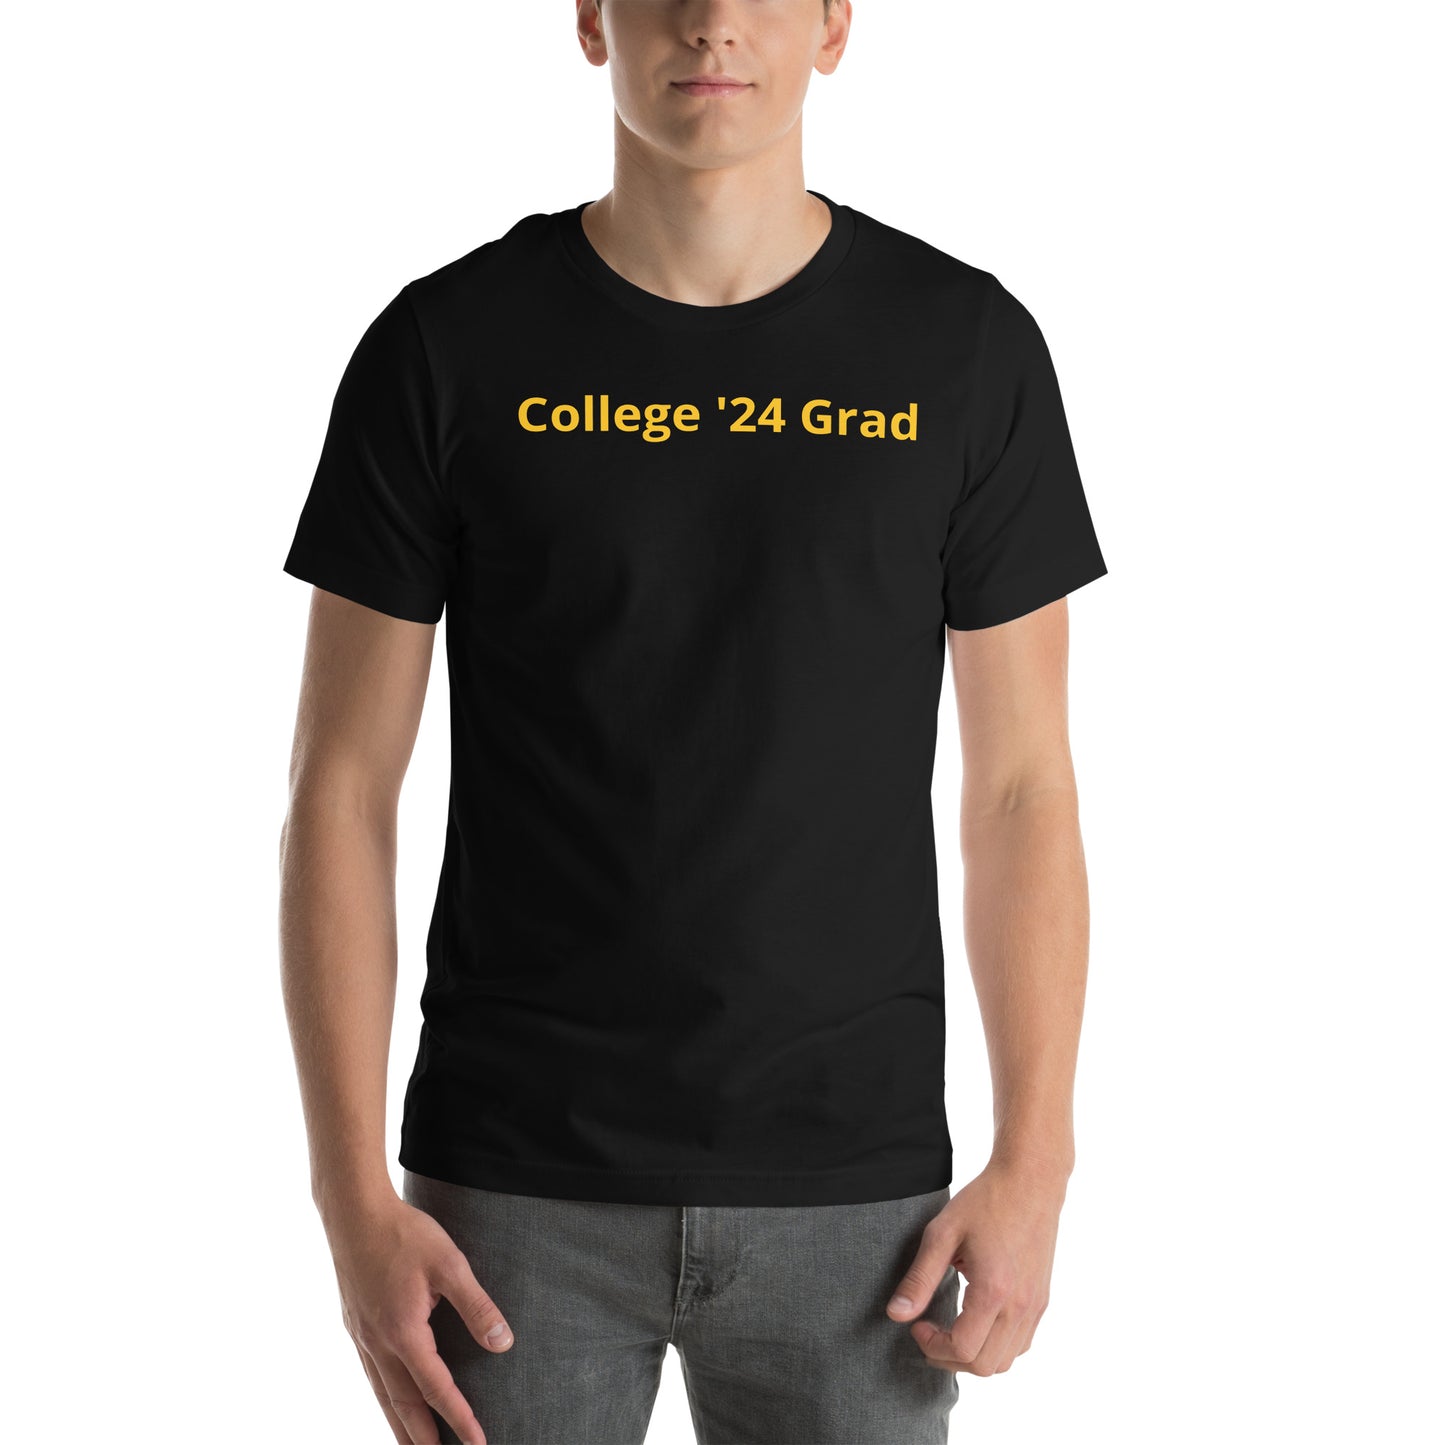 Black short sleeve tee shirt that says "College '24 Grad" on the front and "Thank you, Mom & Dad" on the back